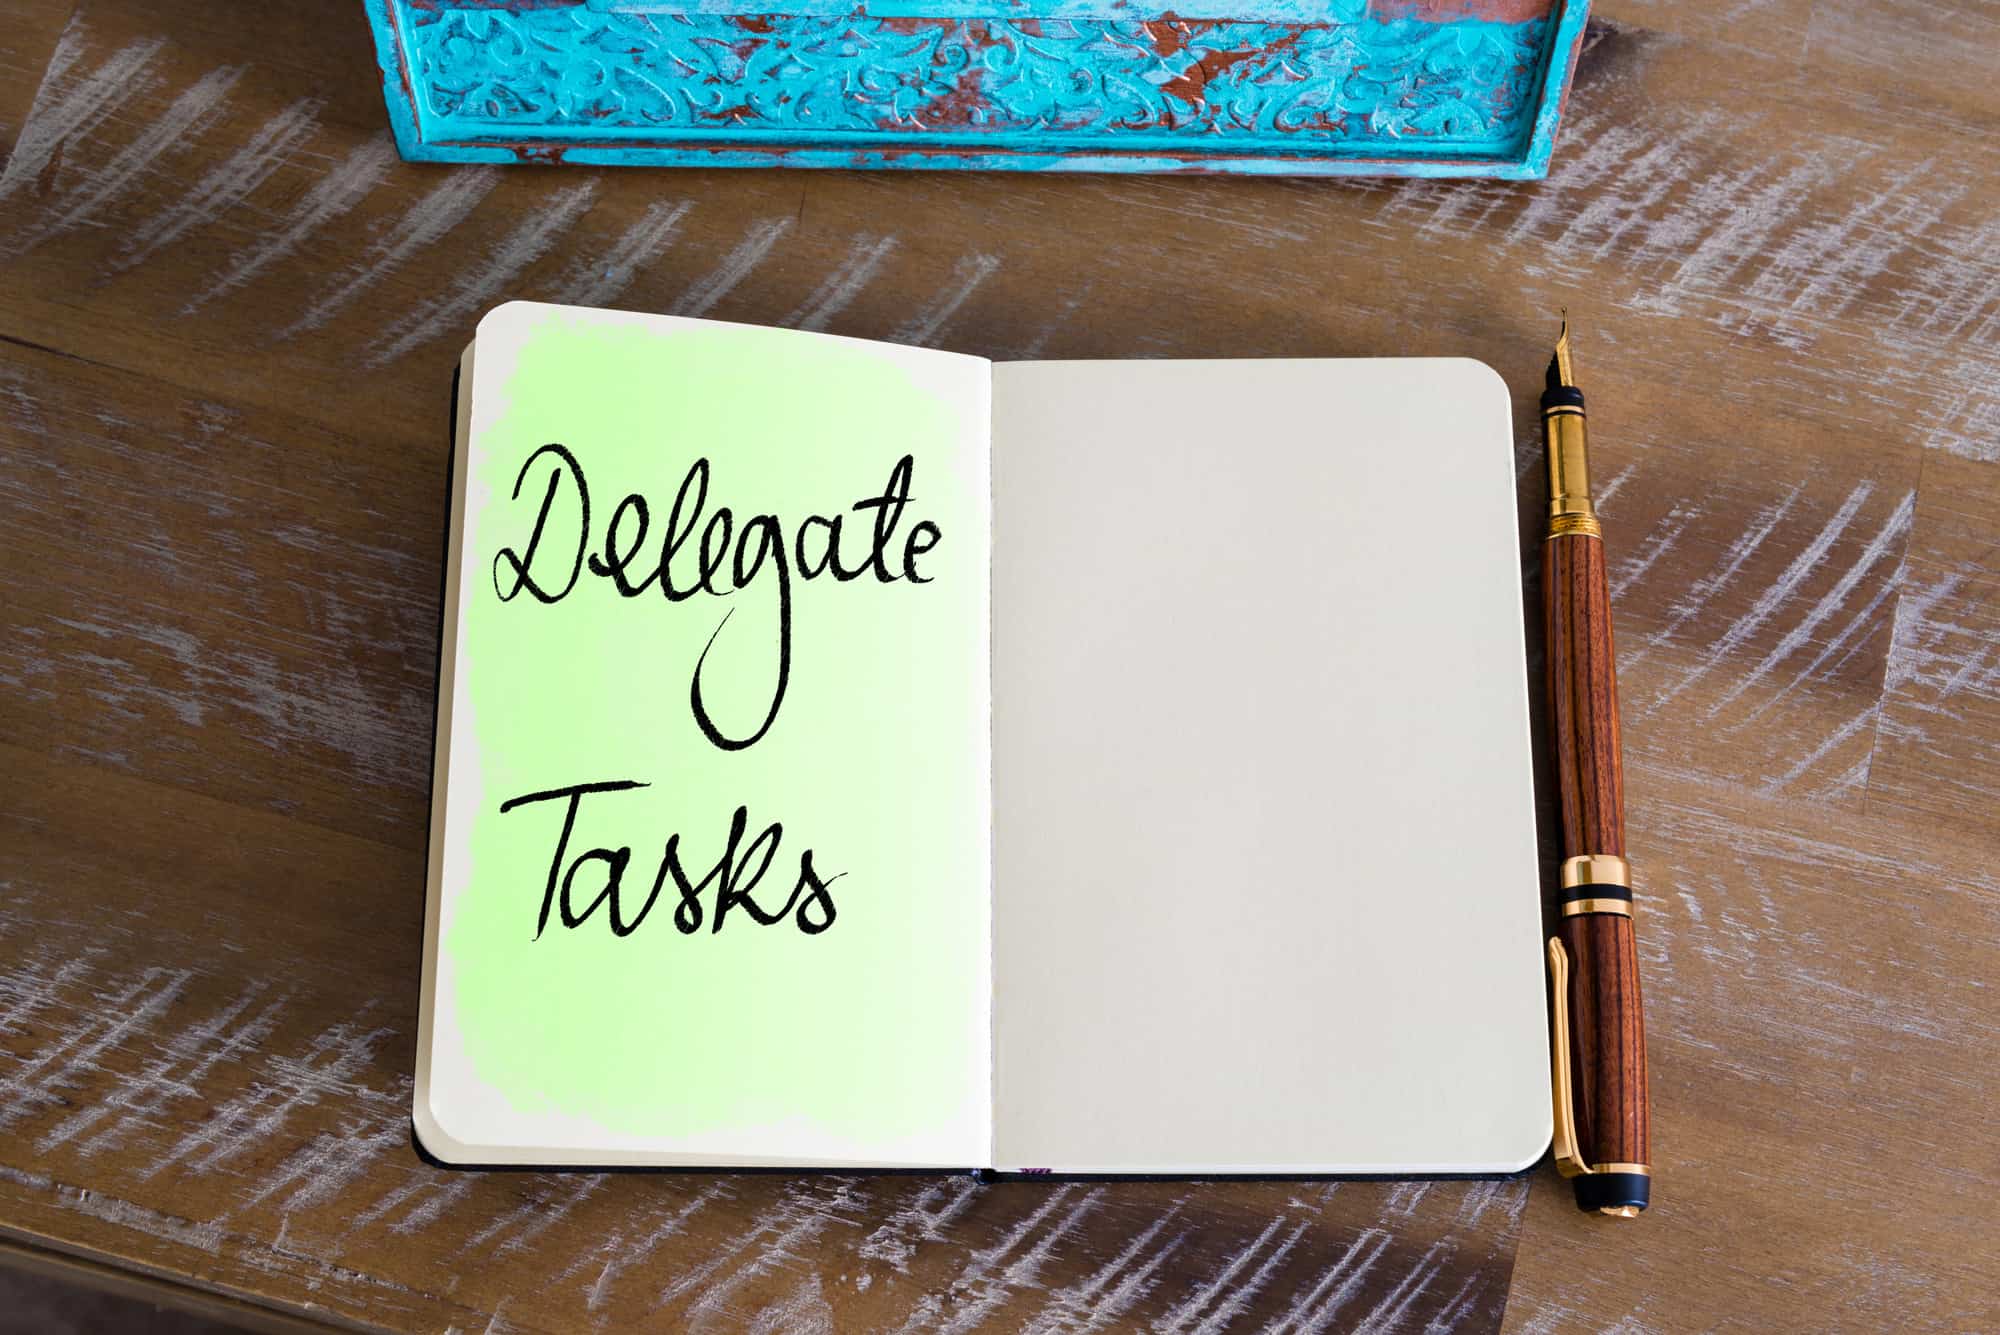 Aaron Vick - 9 Tasks You Should Delegate to Others and Why